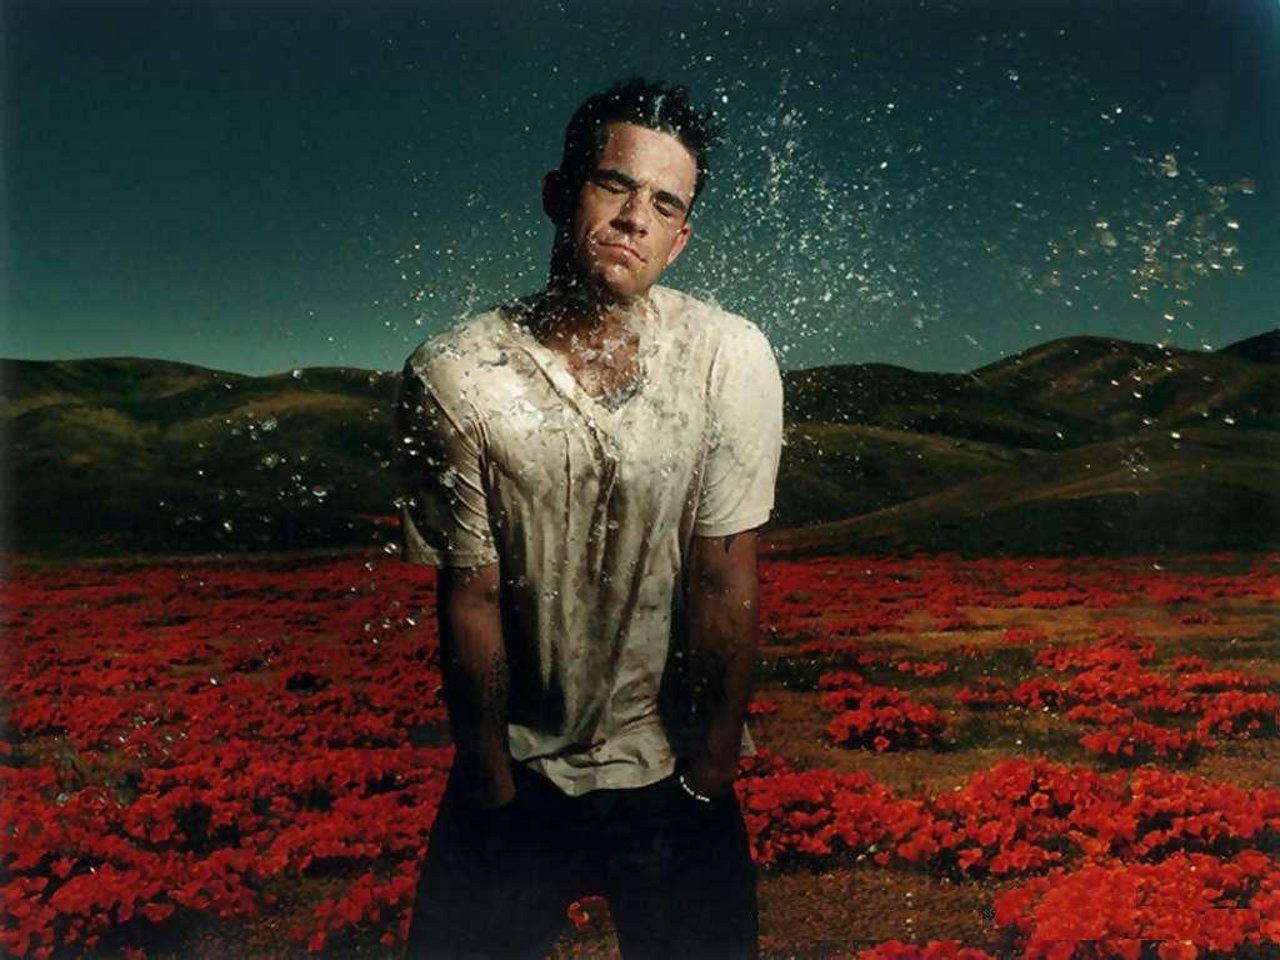 robbie williams wallpaper,nature,sky,red,atmosphere,photography